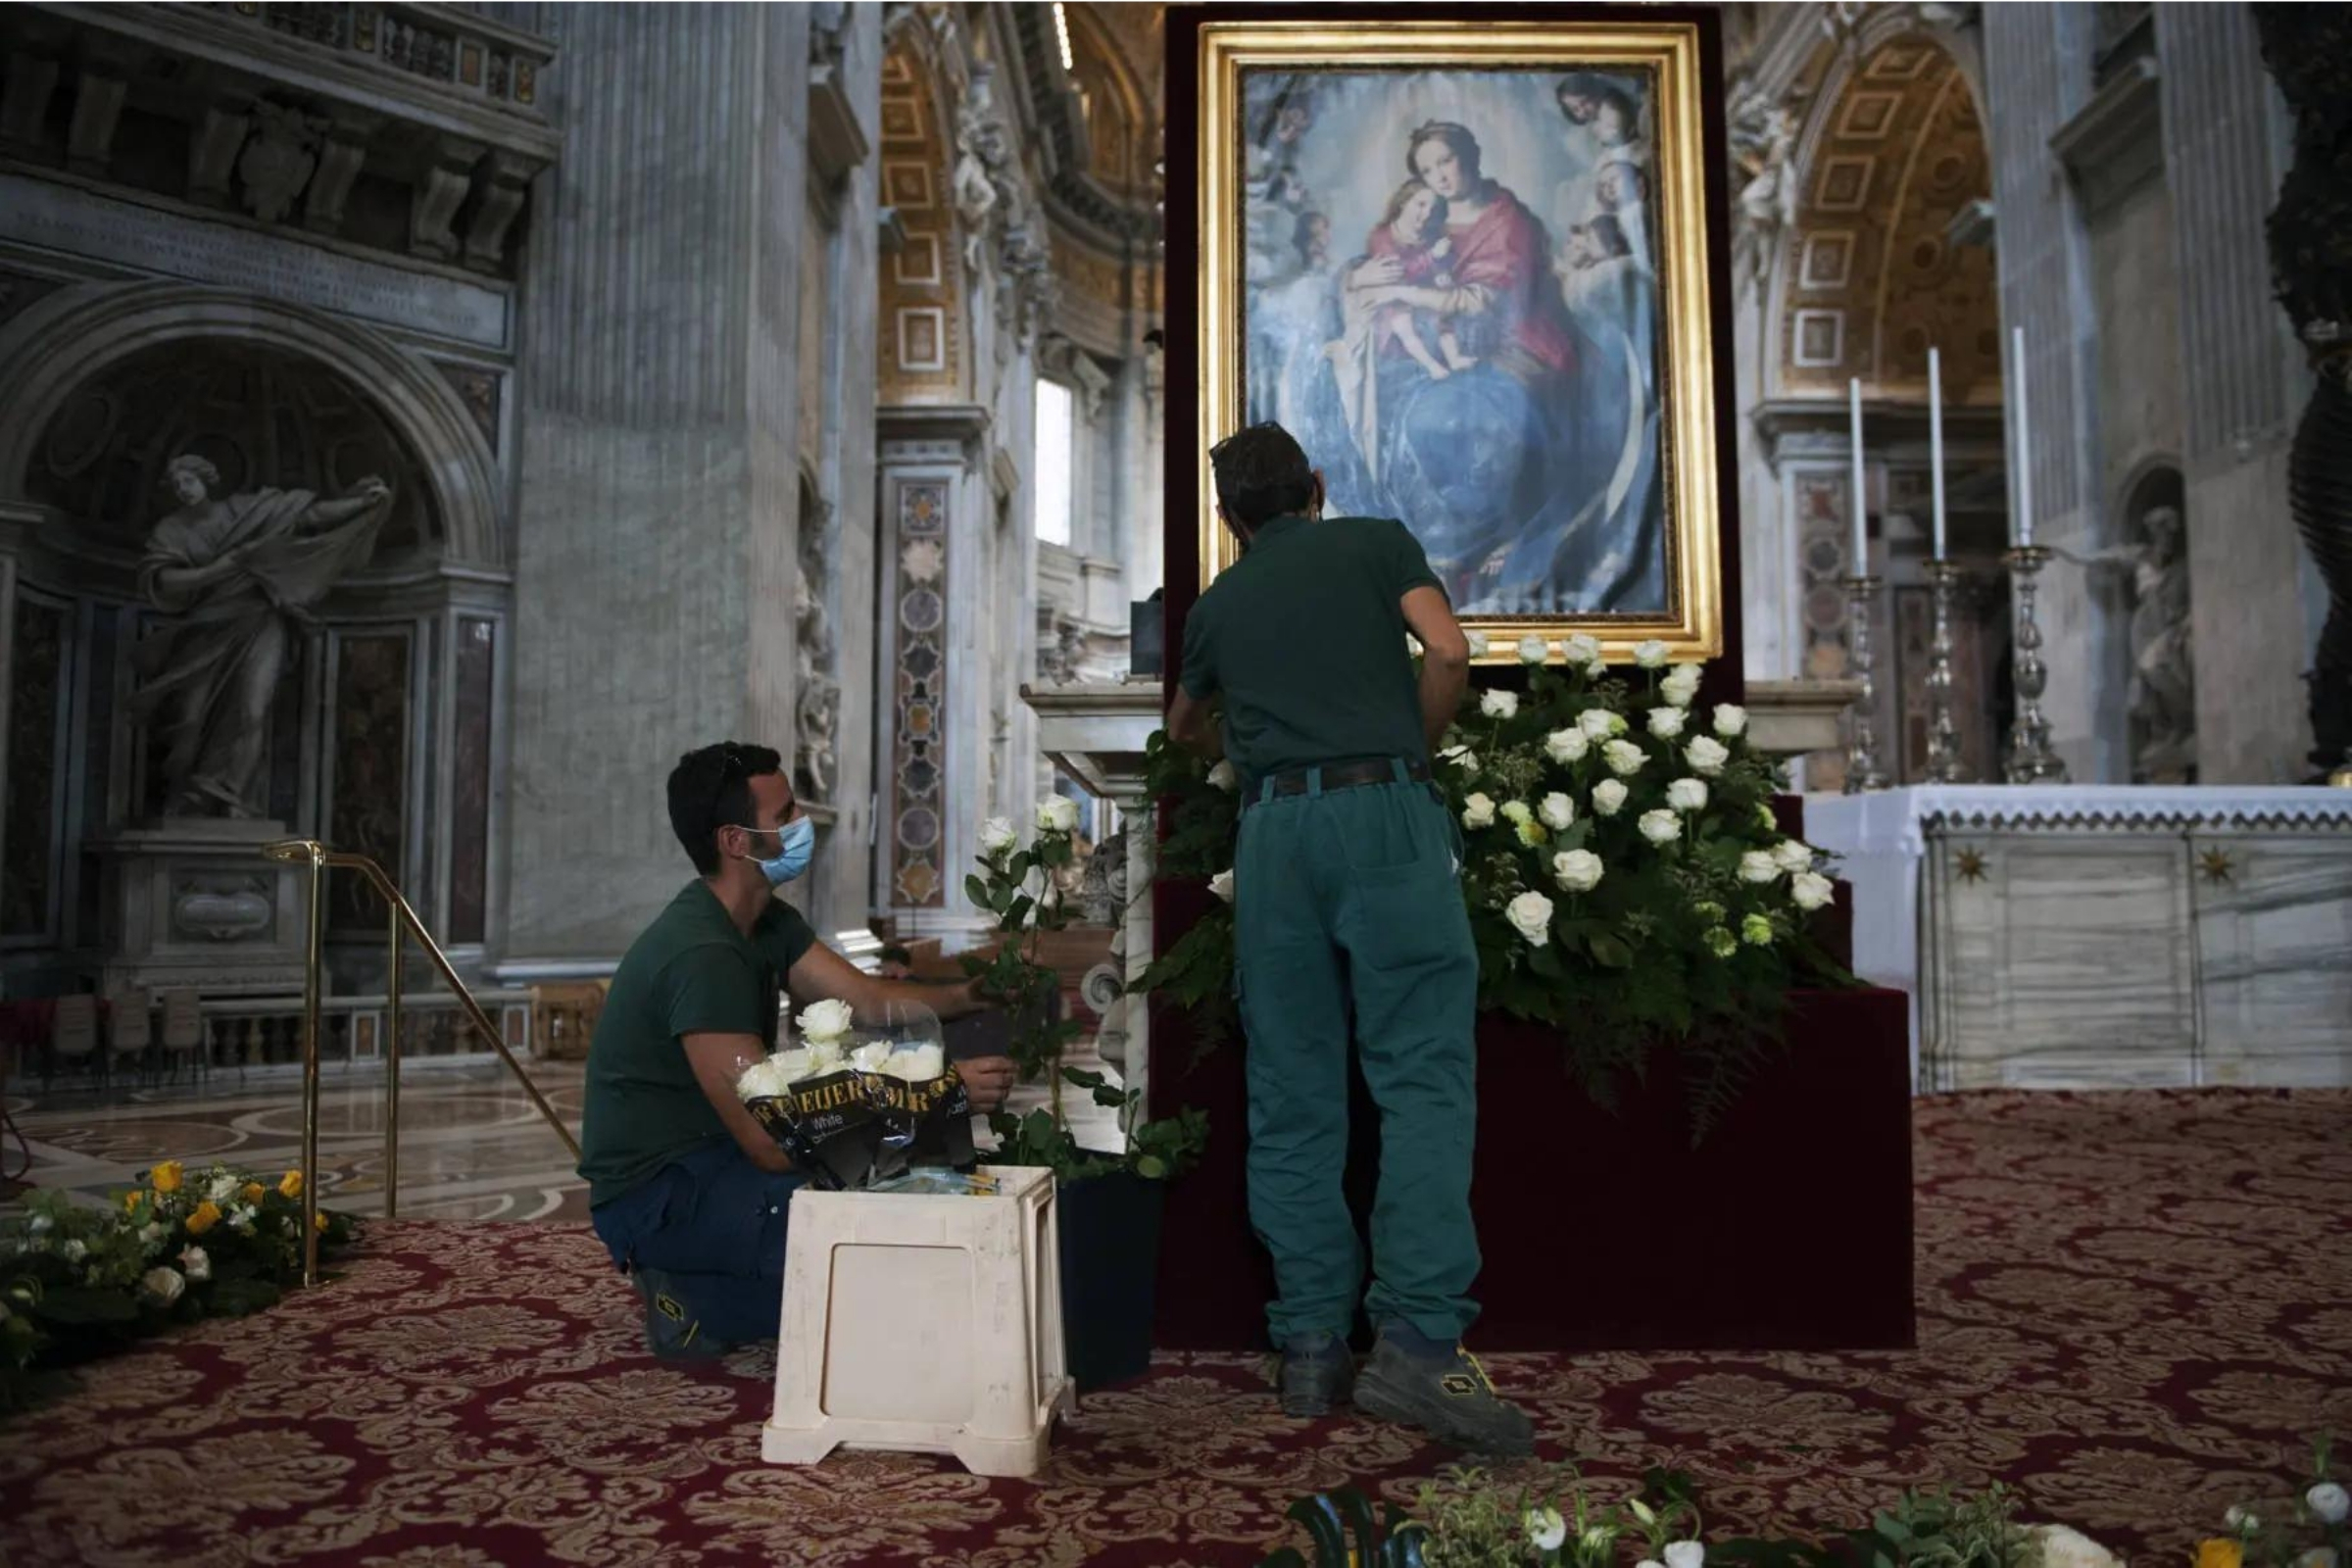 Flowers Help Deliver the Pope’s Blessing For First World Day for Grandparents and Elderly Dutch, Italian, Kenyan flowers